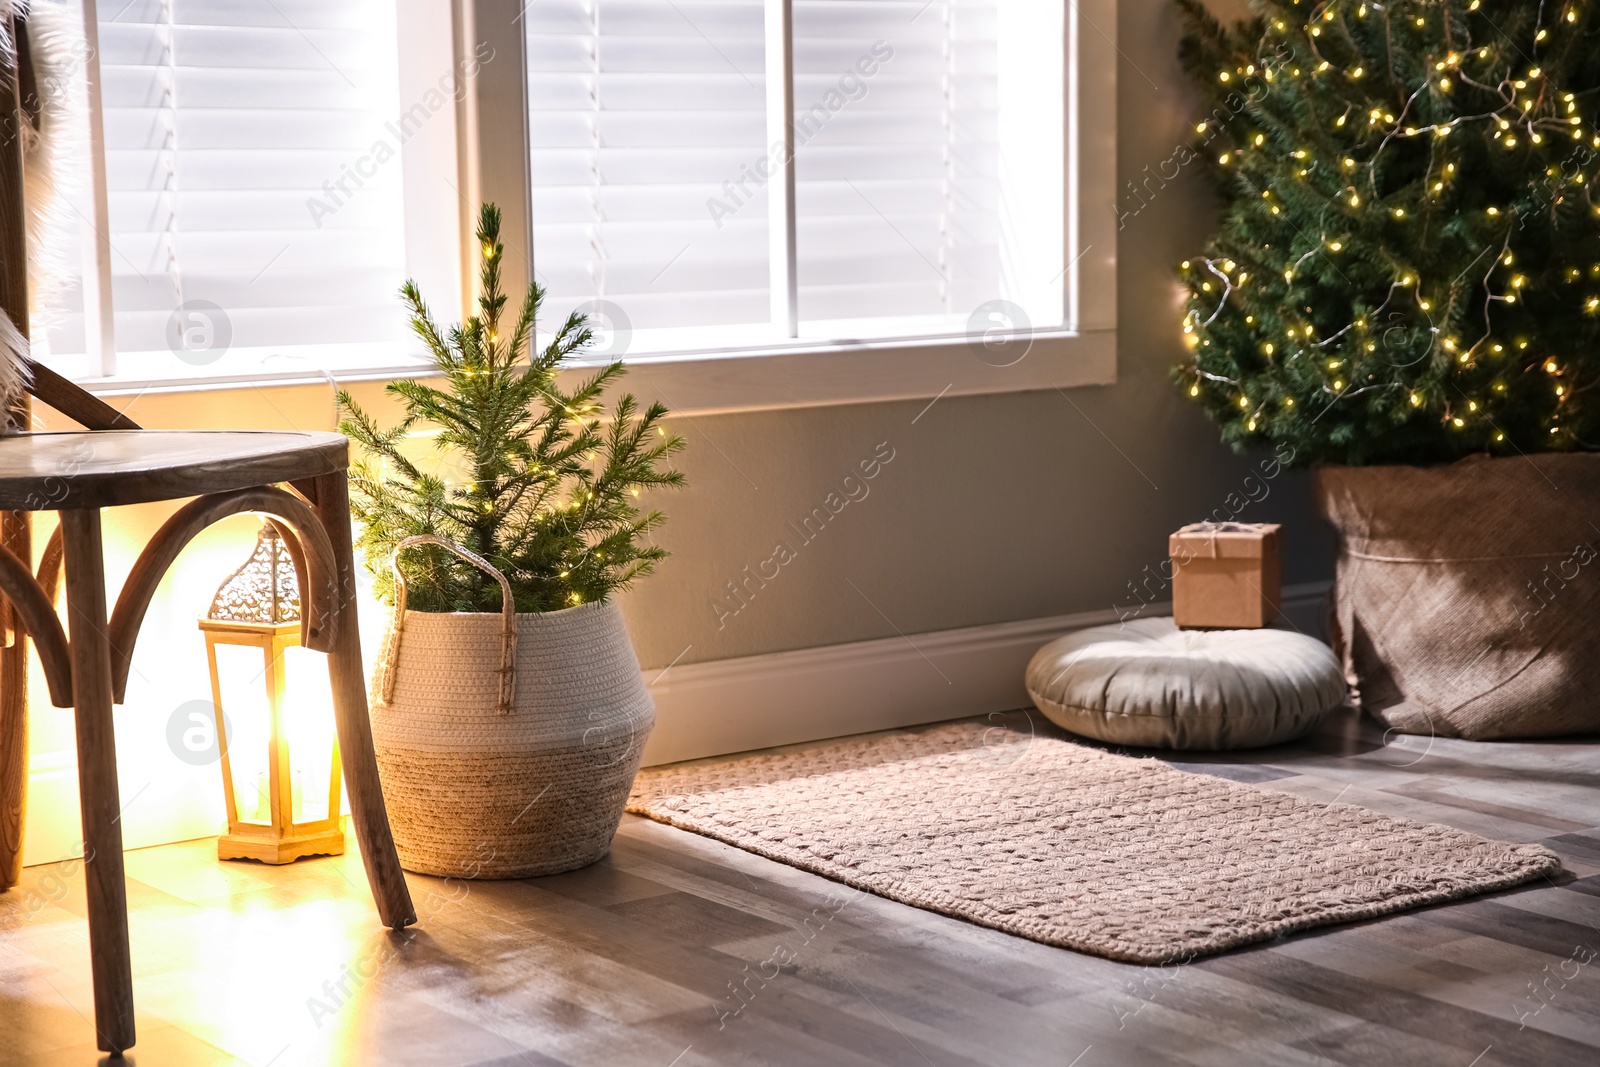 Photo of Small and big Christmas trees near window in room. Festive interior design